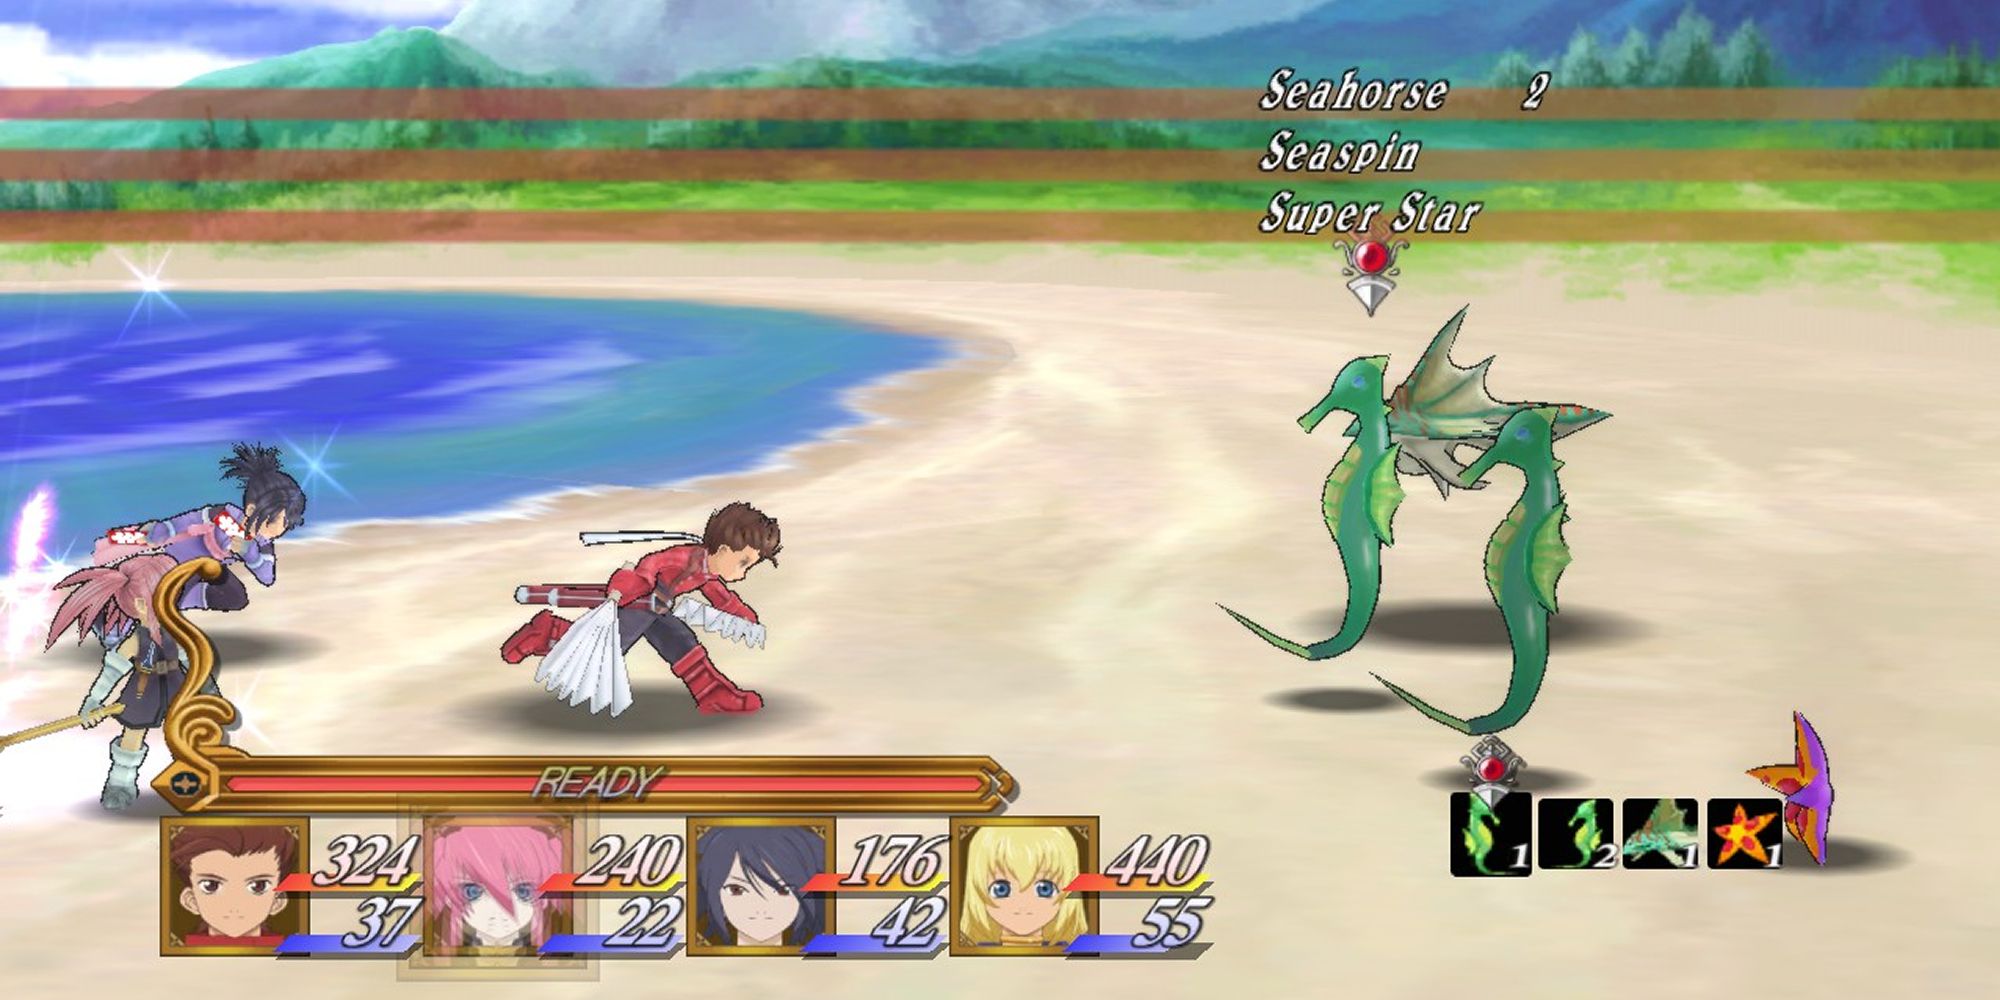 The party engaging aquatic enemies in Tales Of Symphonia.